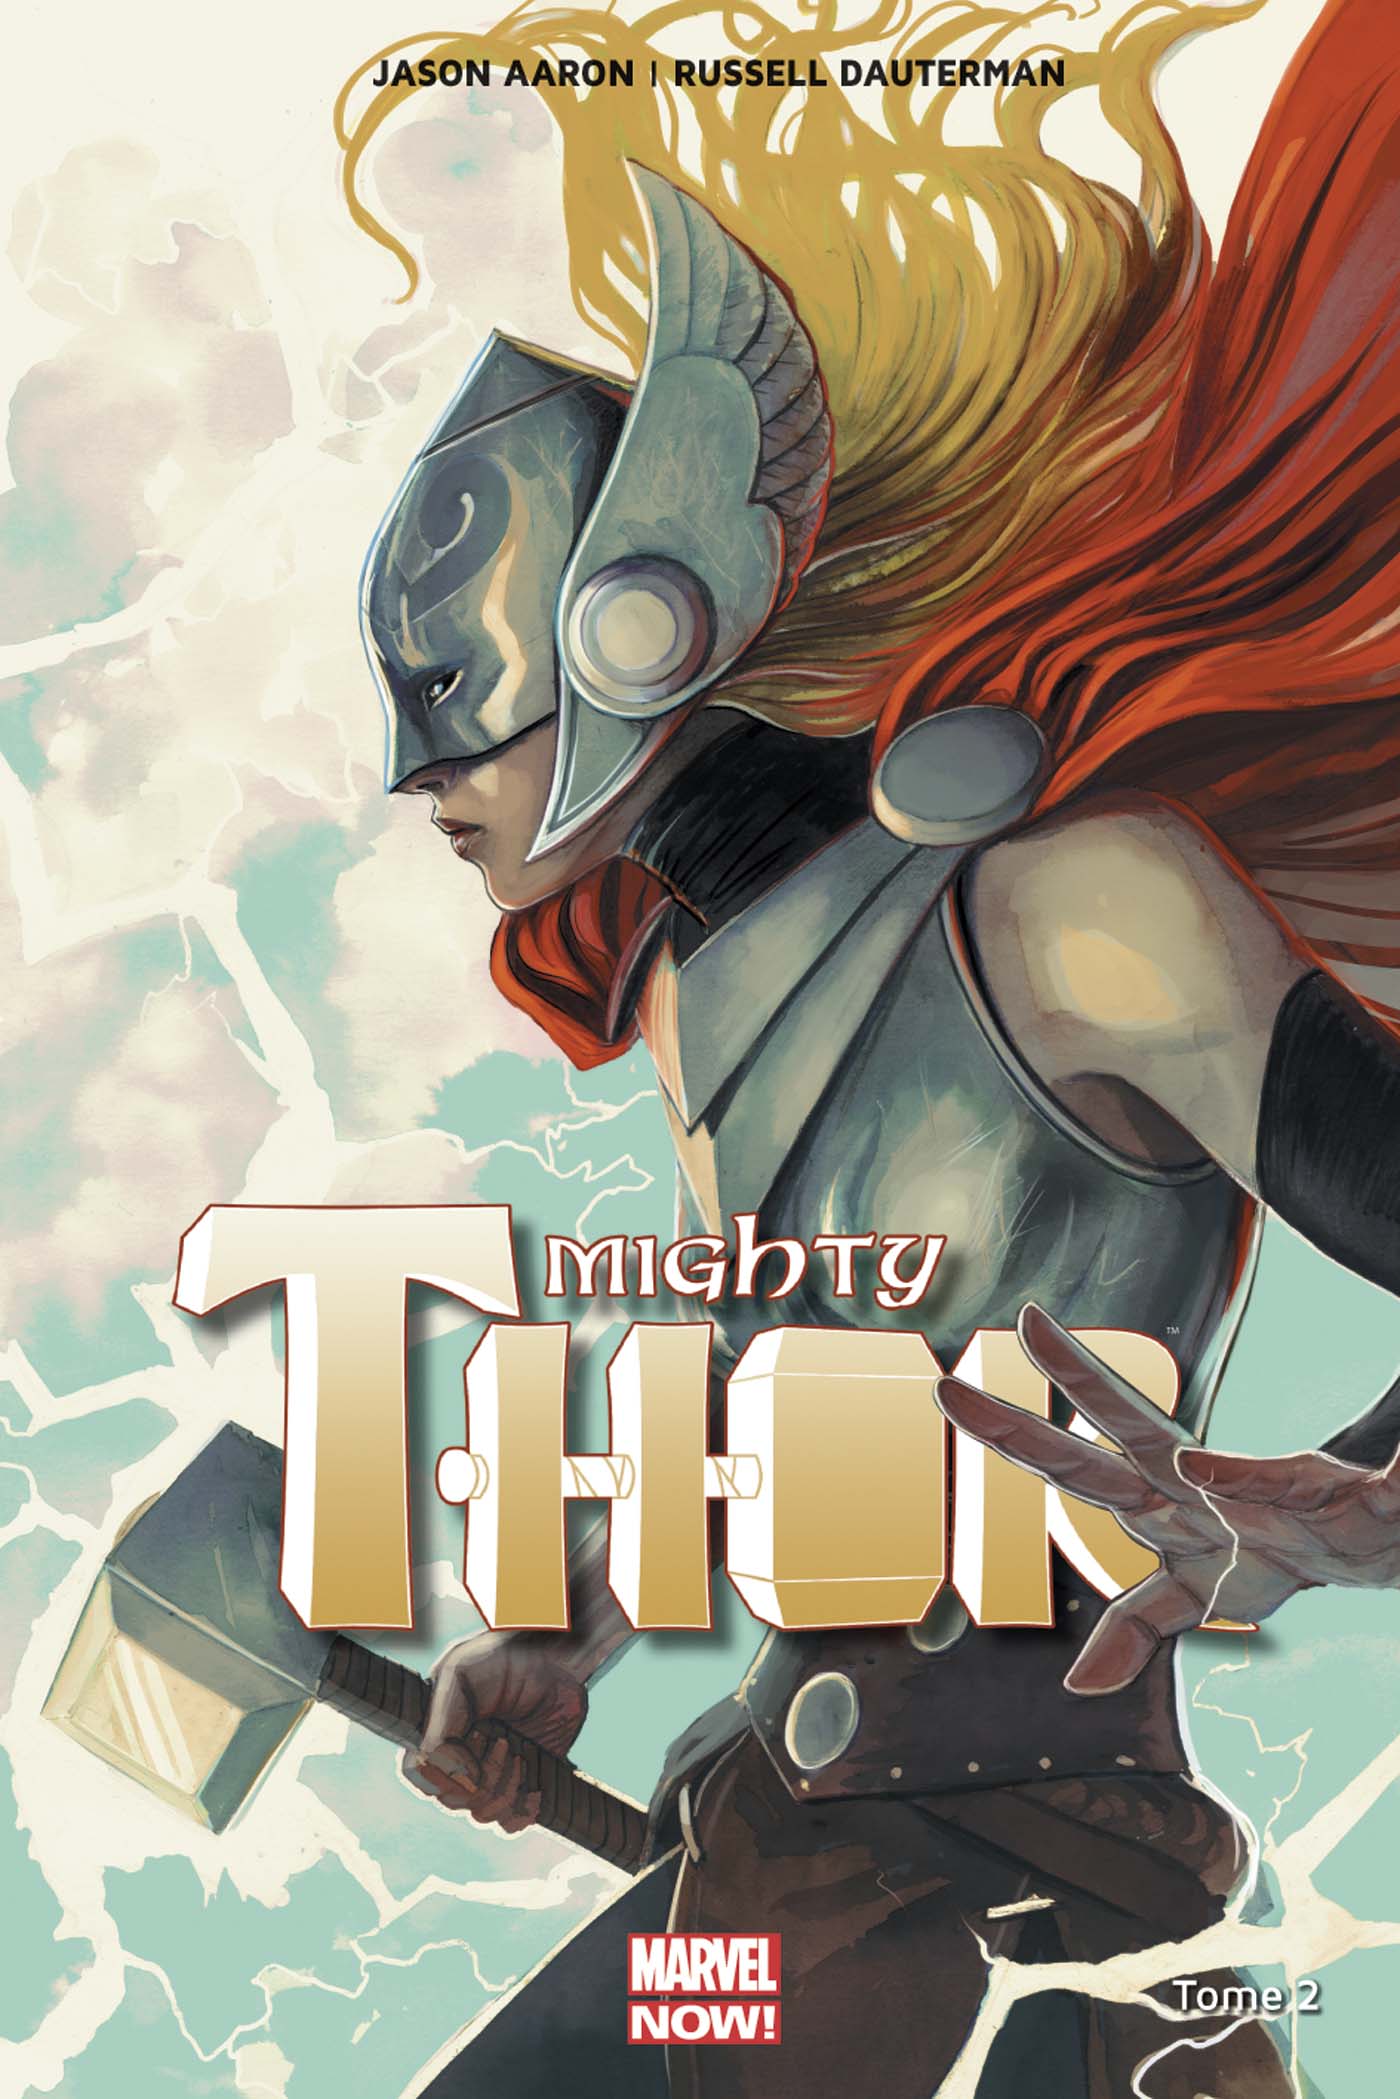 the-mighty-thor-comics-volume-2-tpb-hardcover-cartonnee-thor-issues-v4-285926